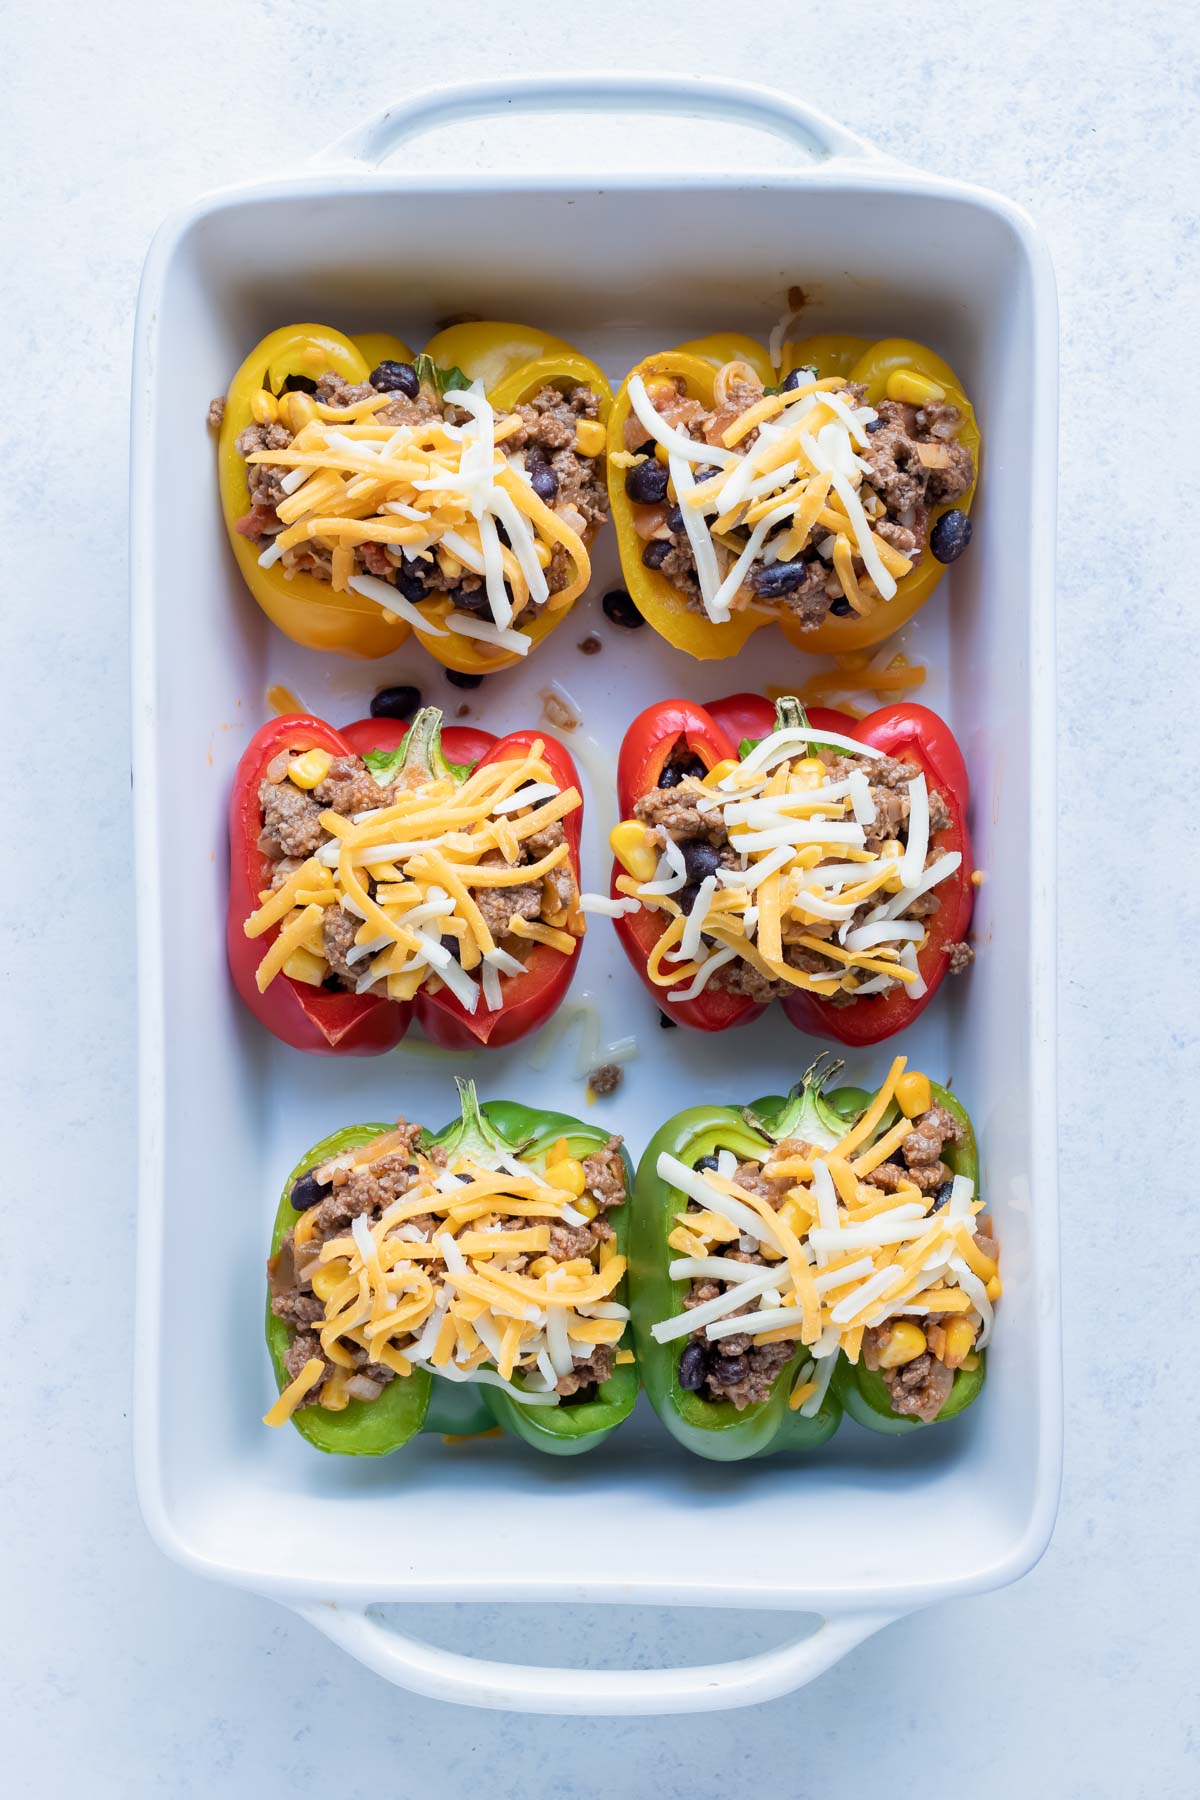 Six rows of stuffed bell peppers are baked for a healthy dinner.